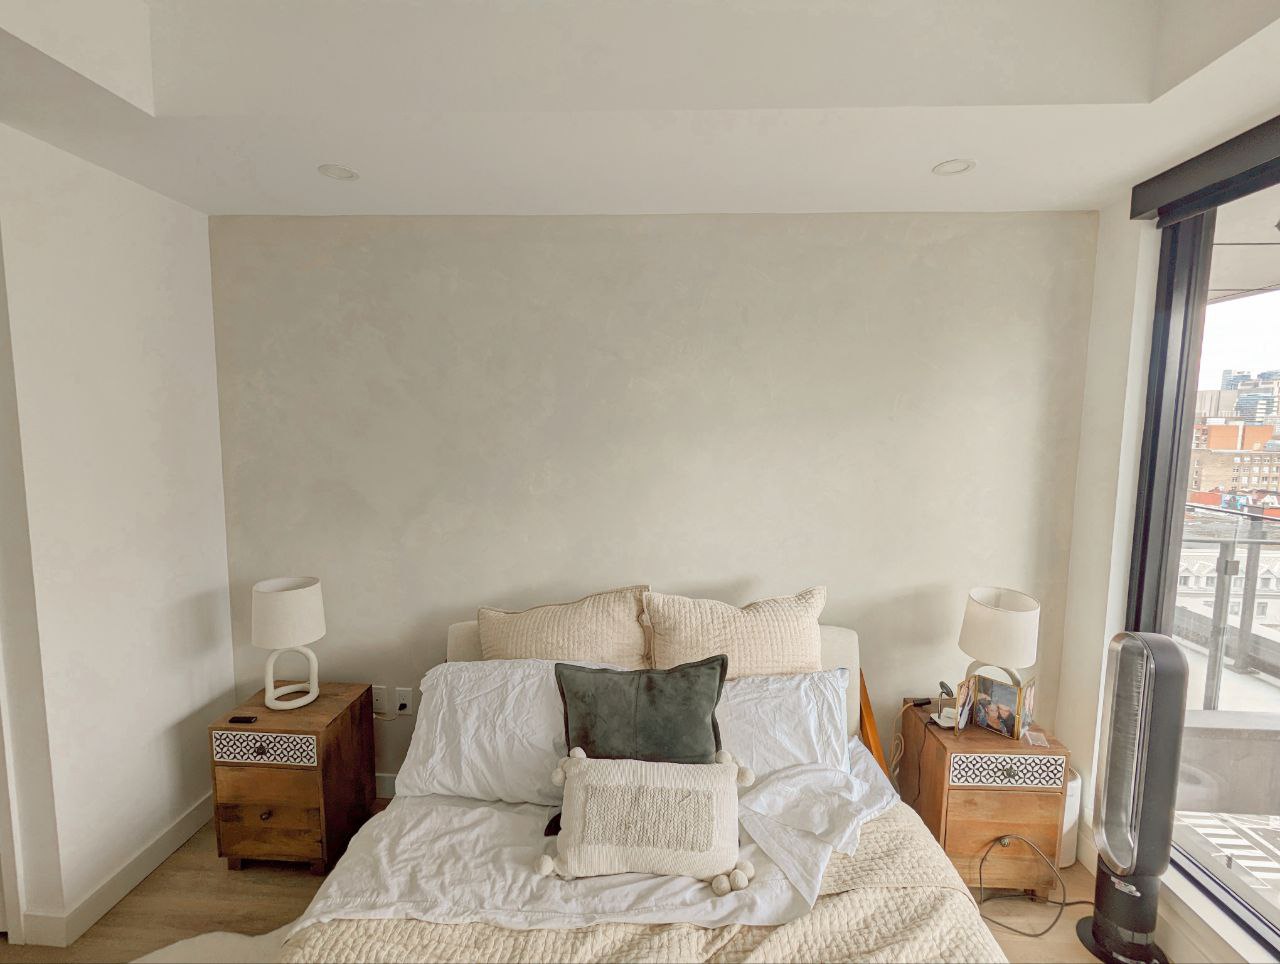 Modern Boho inspired bedroom with limewash accent wall in grayish beige color, showcasing textured finish.